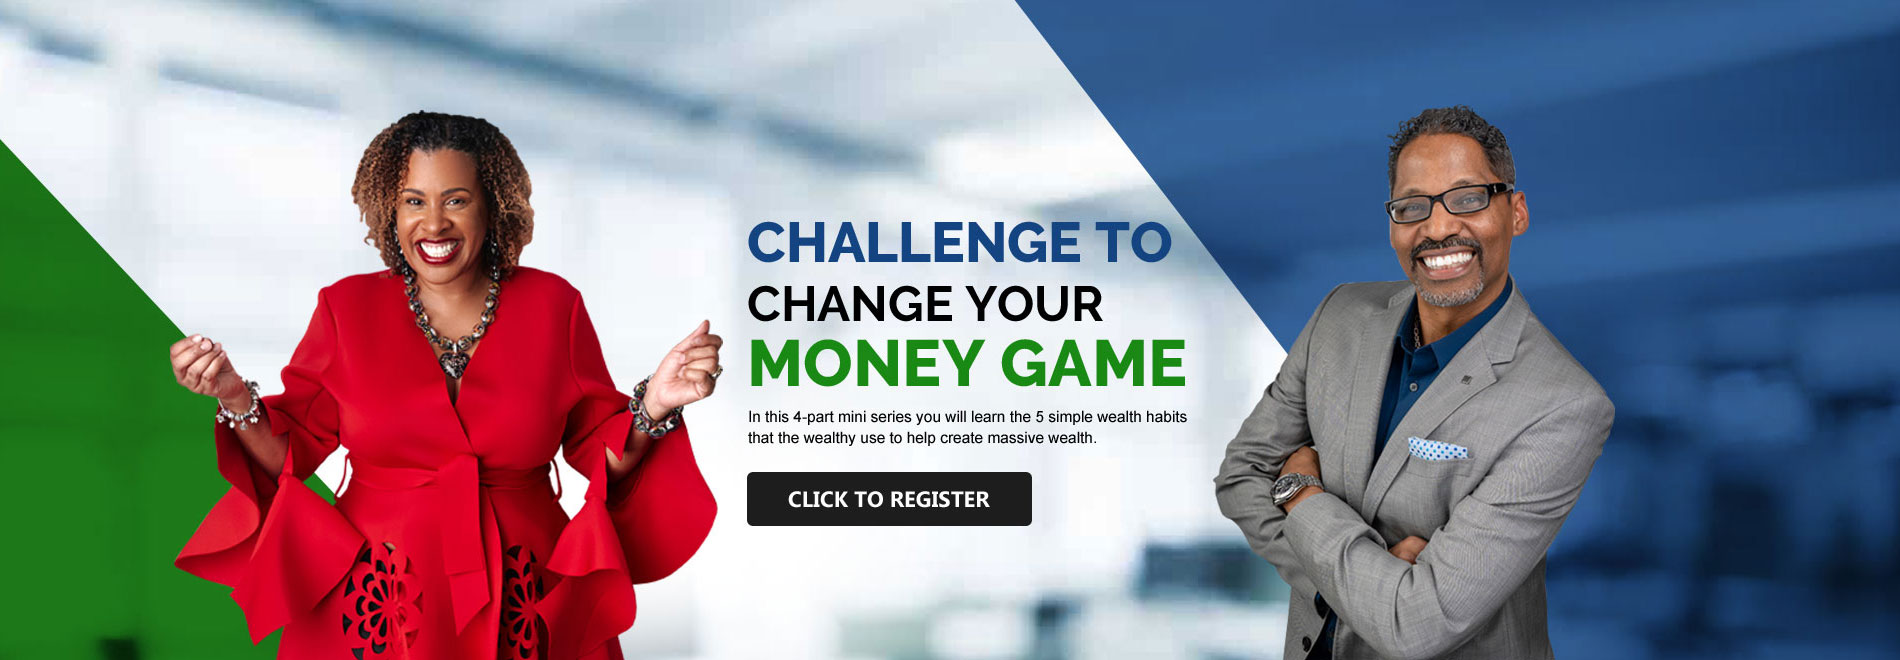 Challenge to change your money game